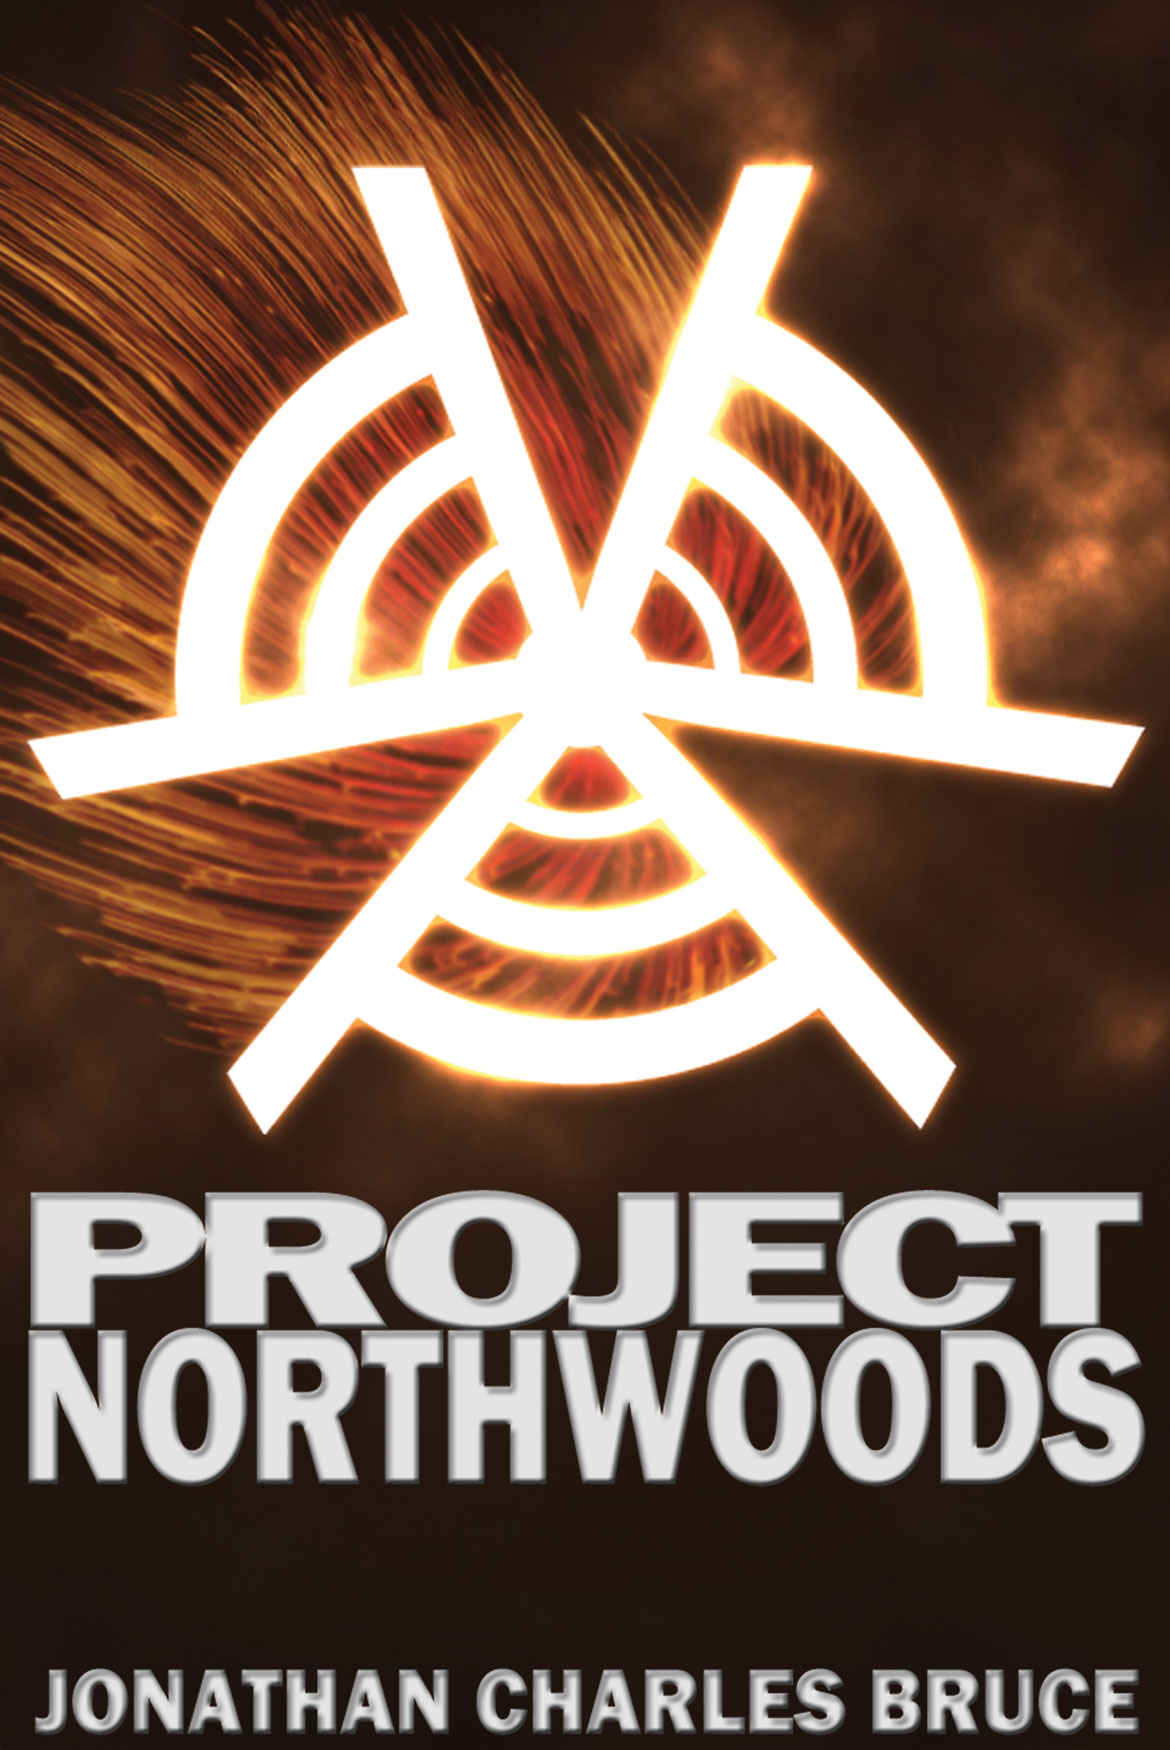 Project Northwoods